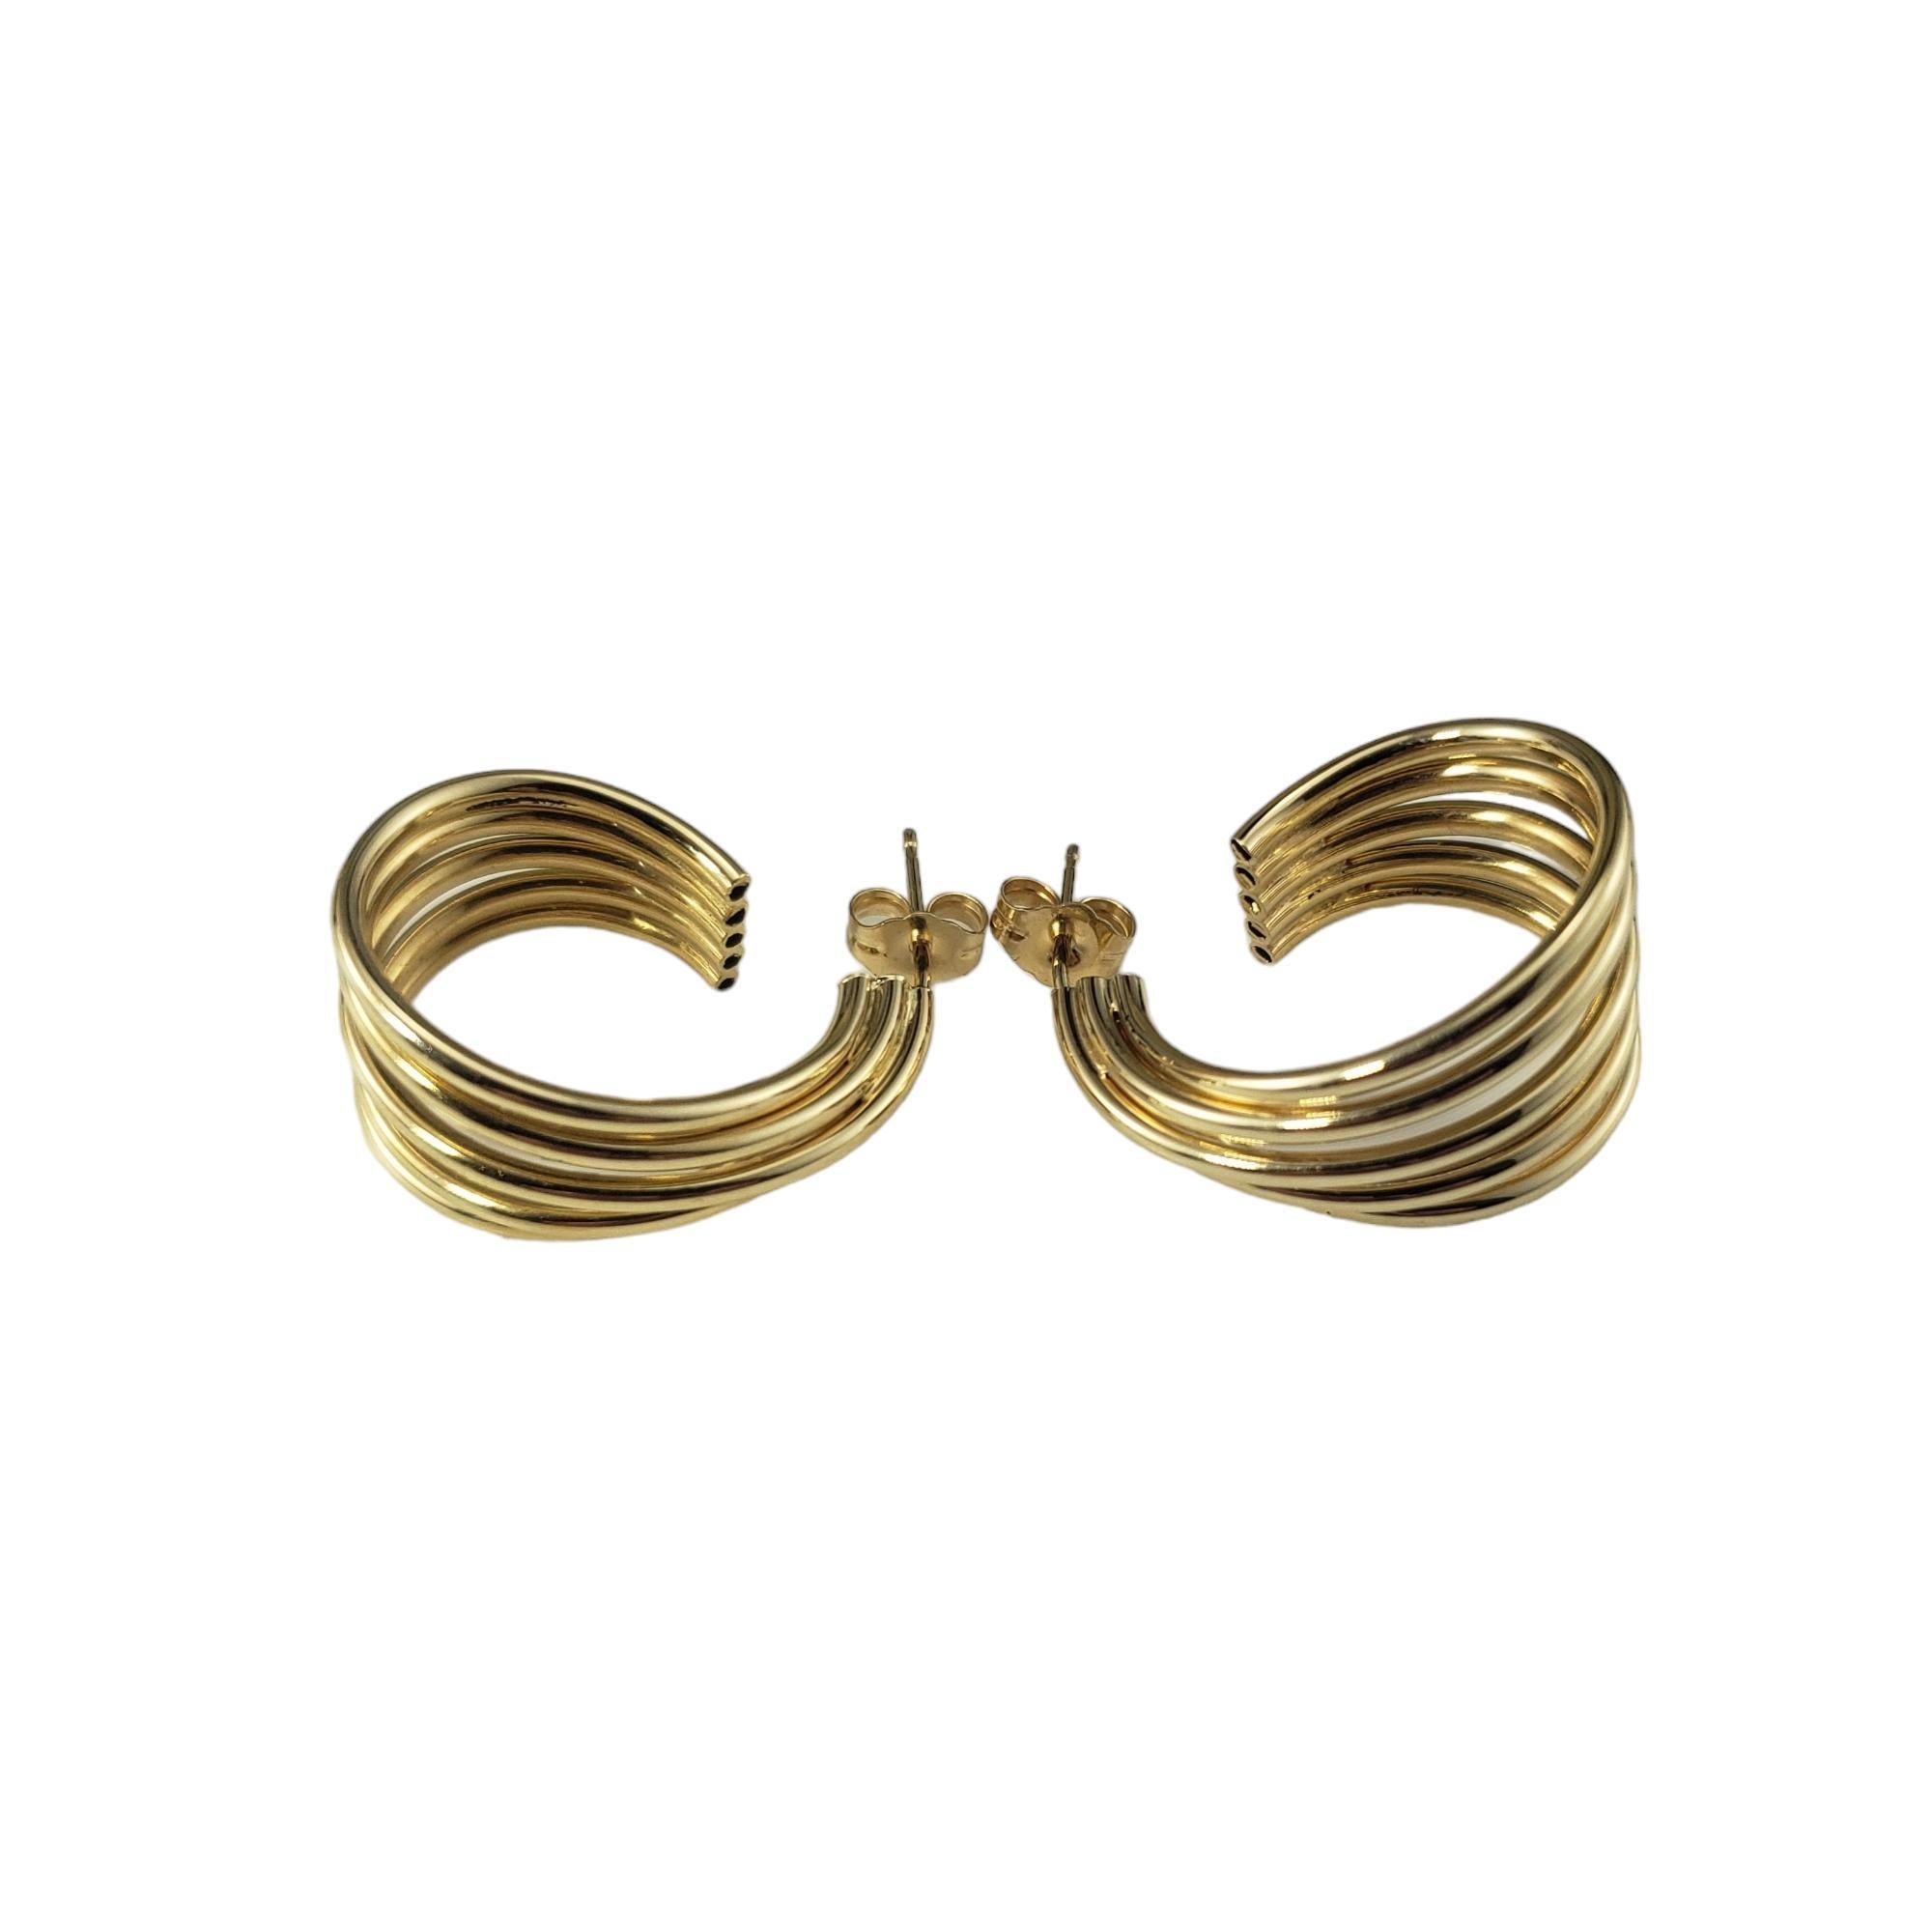 14 Karat Yellow Gold Hoop Earrings-

These elegant hoop earrings are crafted in beautifully detailed 14K yellow gold.  

Push back closures. 

Width: 14.5 mm.

Size: 24 mm x 14.5 mm

Stamped: 14

Weight: 2.8 dwt./4.4 gr.

Very good condition,